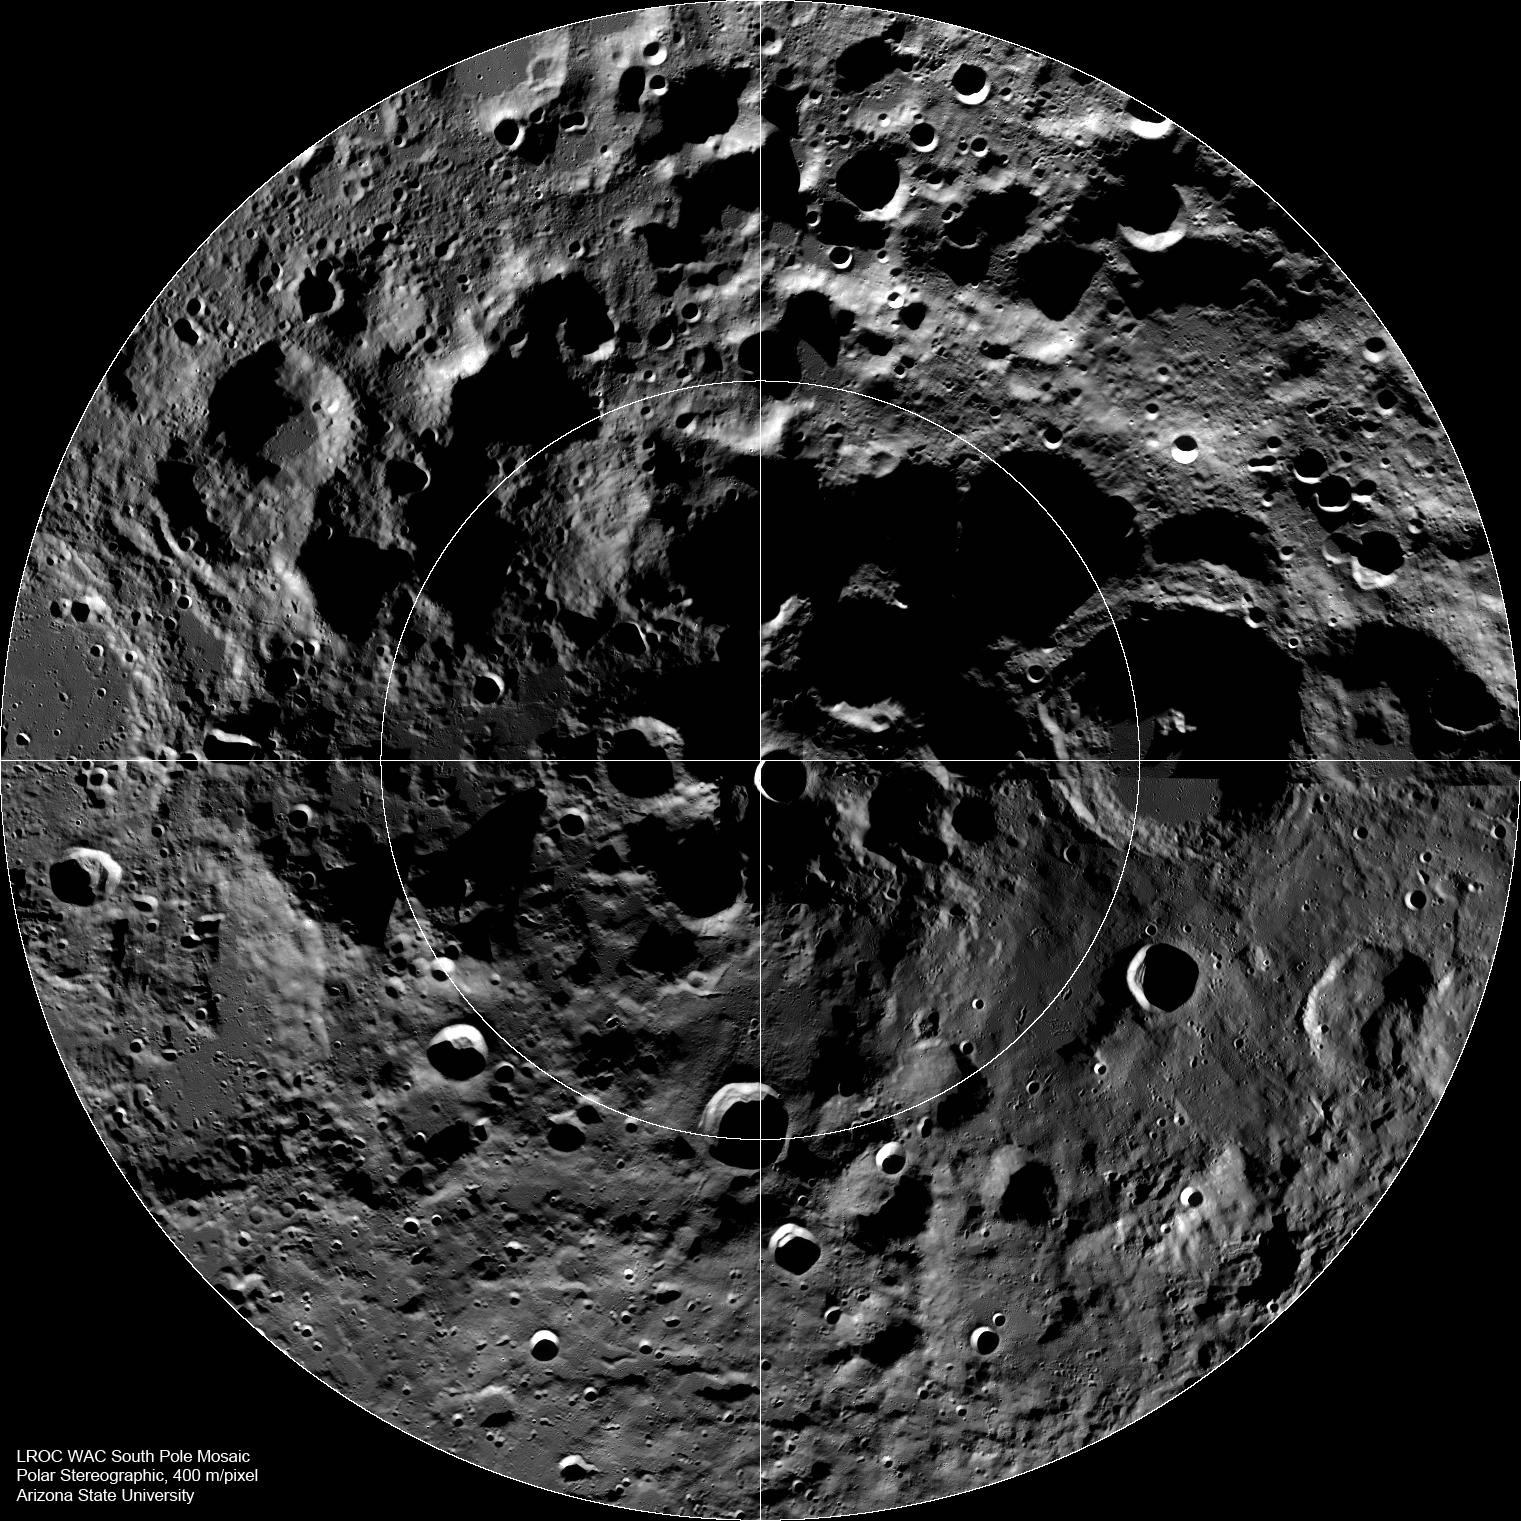 A mosaic image of the south pole of the Moon. Henson crater is located just south of de Gerlache craters, seen here to the left of the south pole at the center of this mosaic.